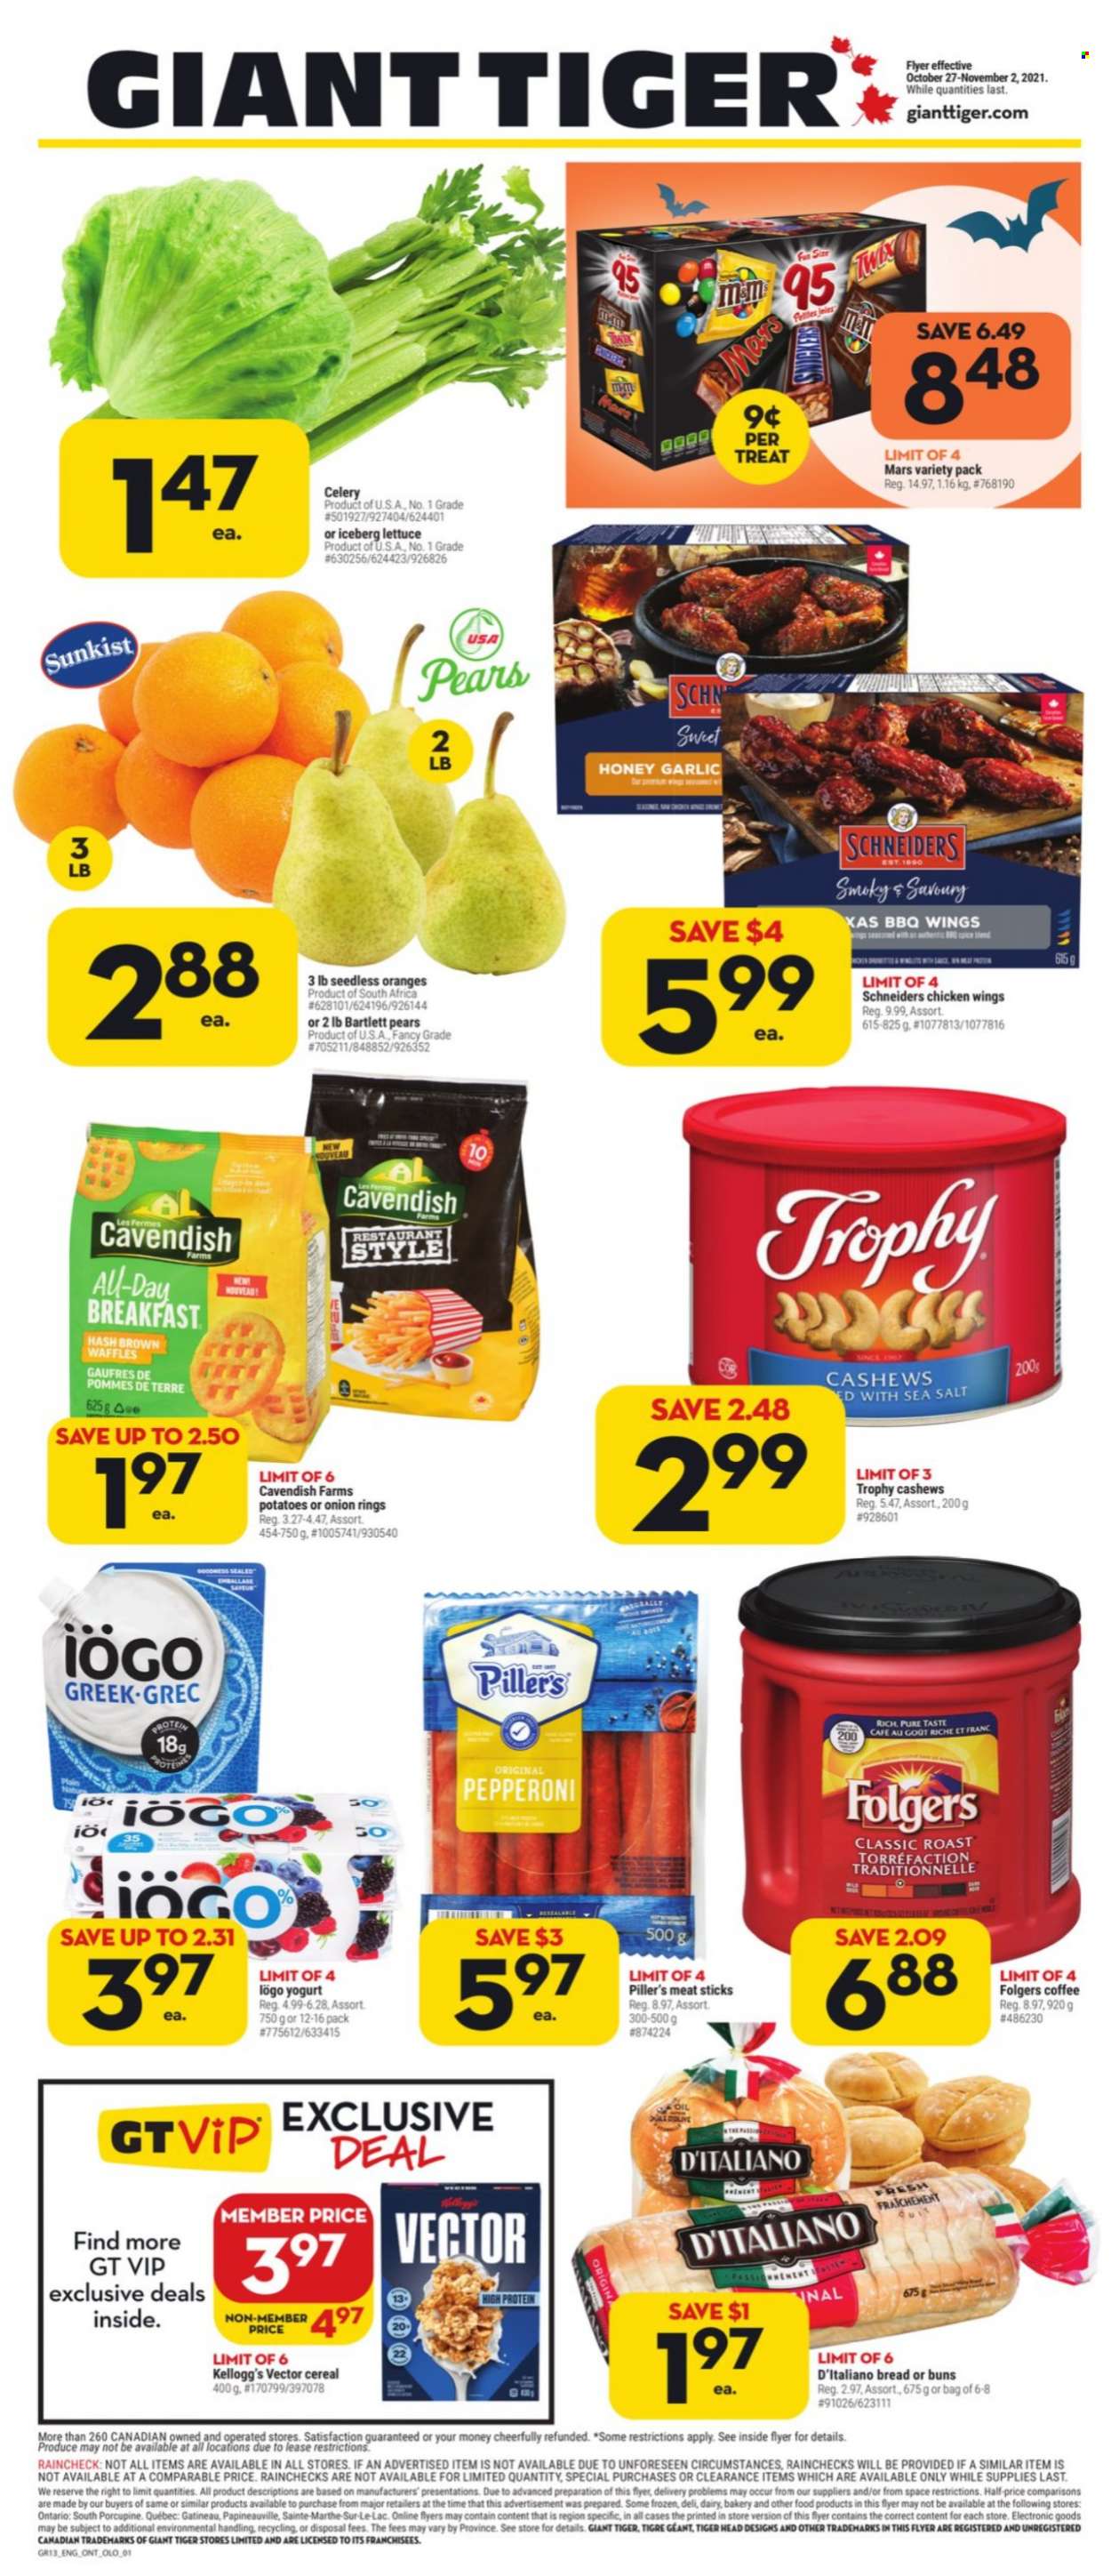 thumbnail - Giant Tiger Flyer - October 27, 2021 - November 02, 2021 - Sales products - bread, buns, waffles, celery, garlic, potatoes, lettuce, Bartlett pears, pears, onion rings, pepperoni, yoghurt, chicken wings, Mars, Kellogg's, cereals, honey, cashews, coffee, Folgers, oranges. Page 1.